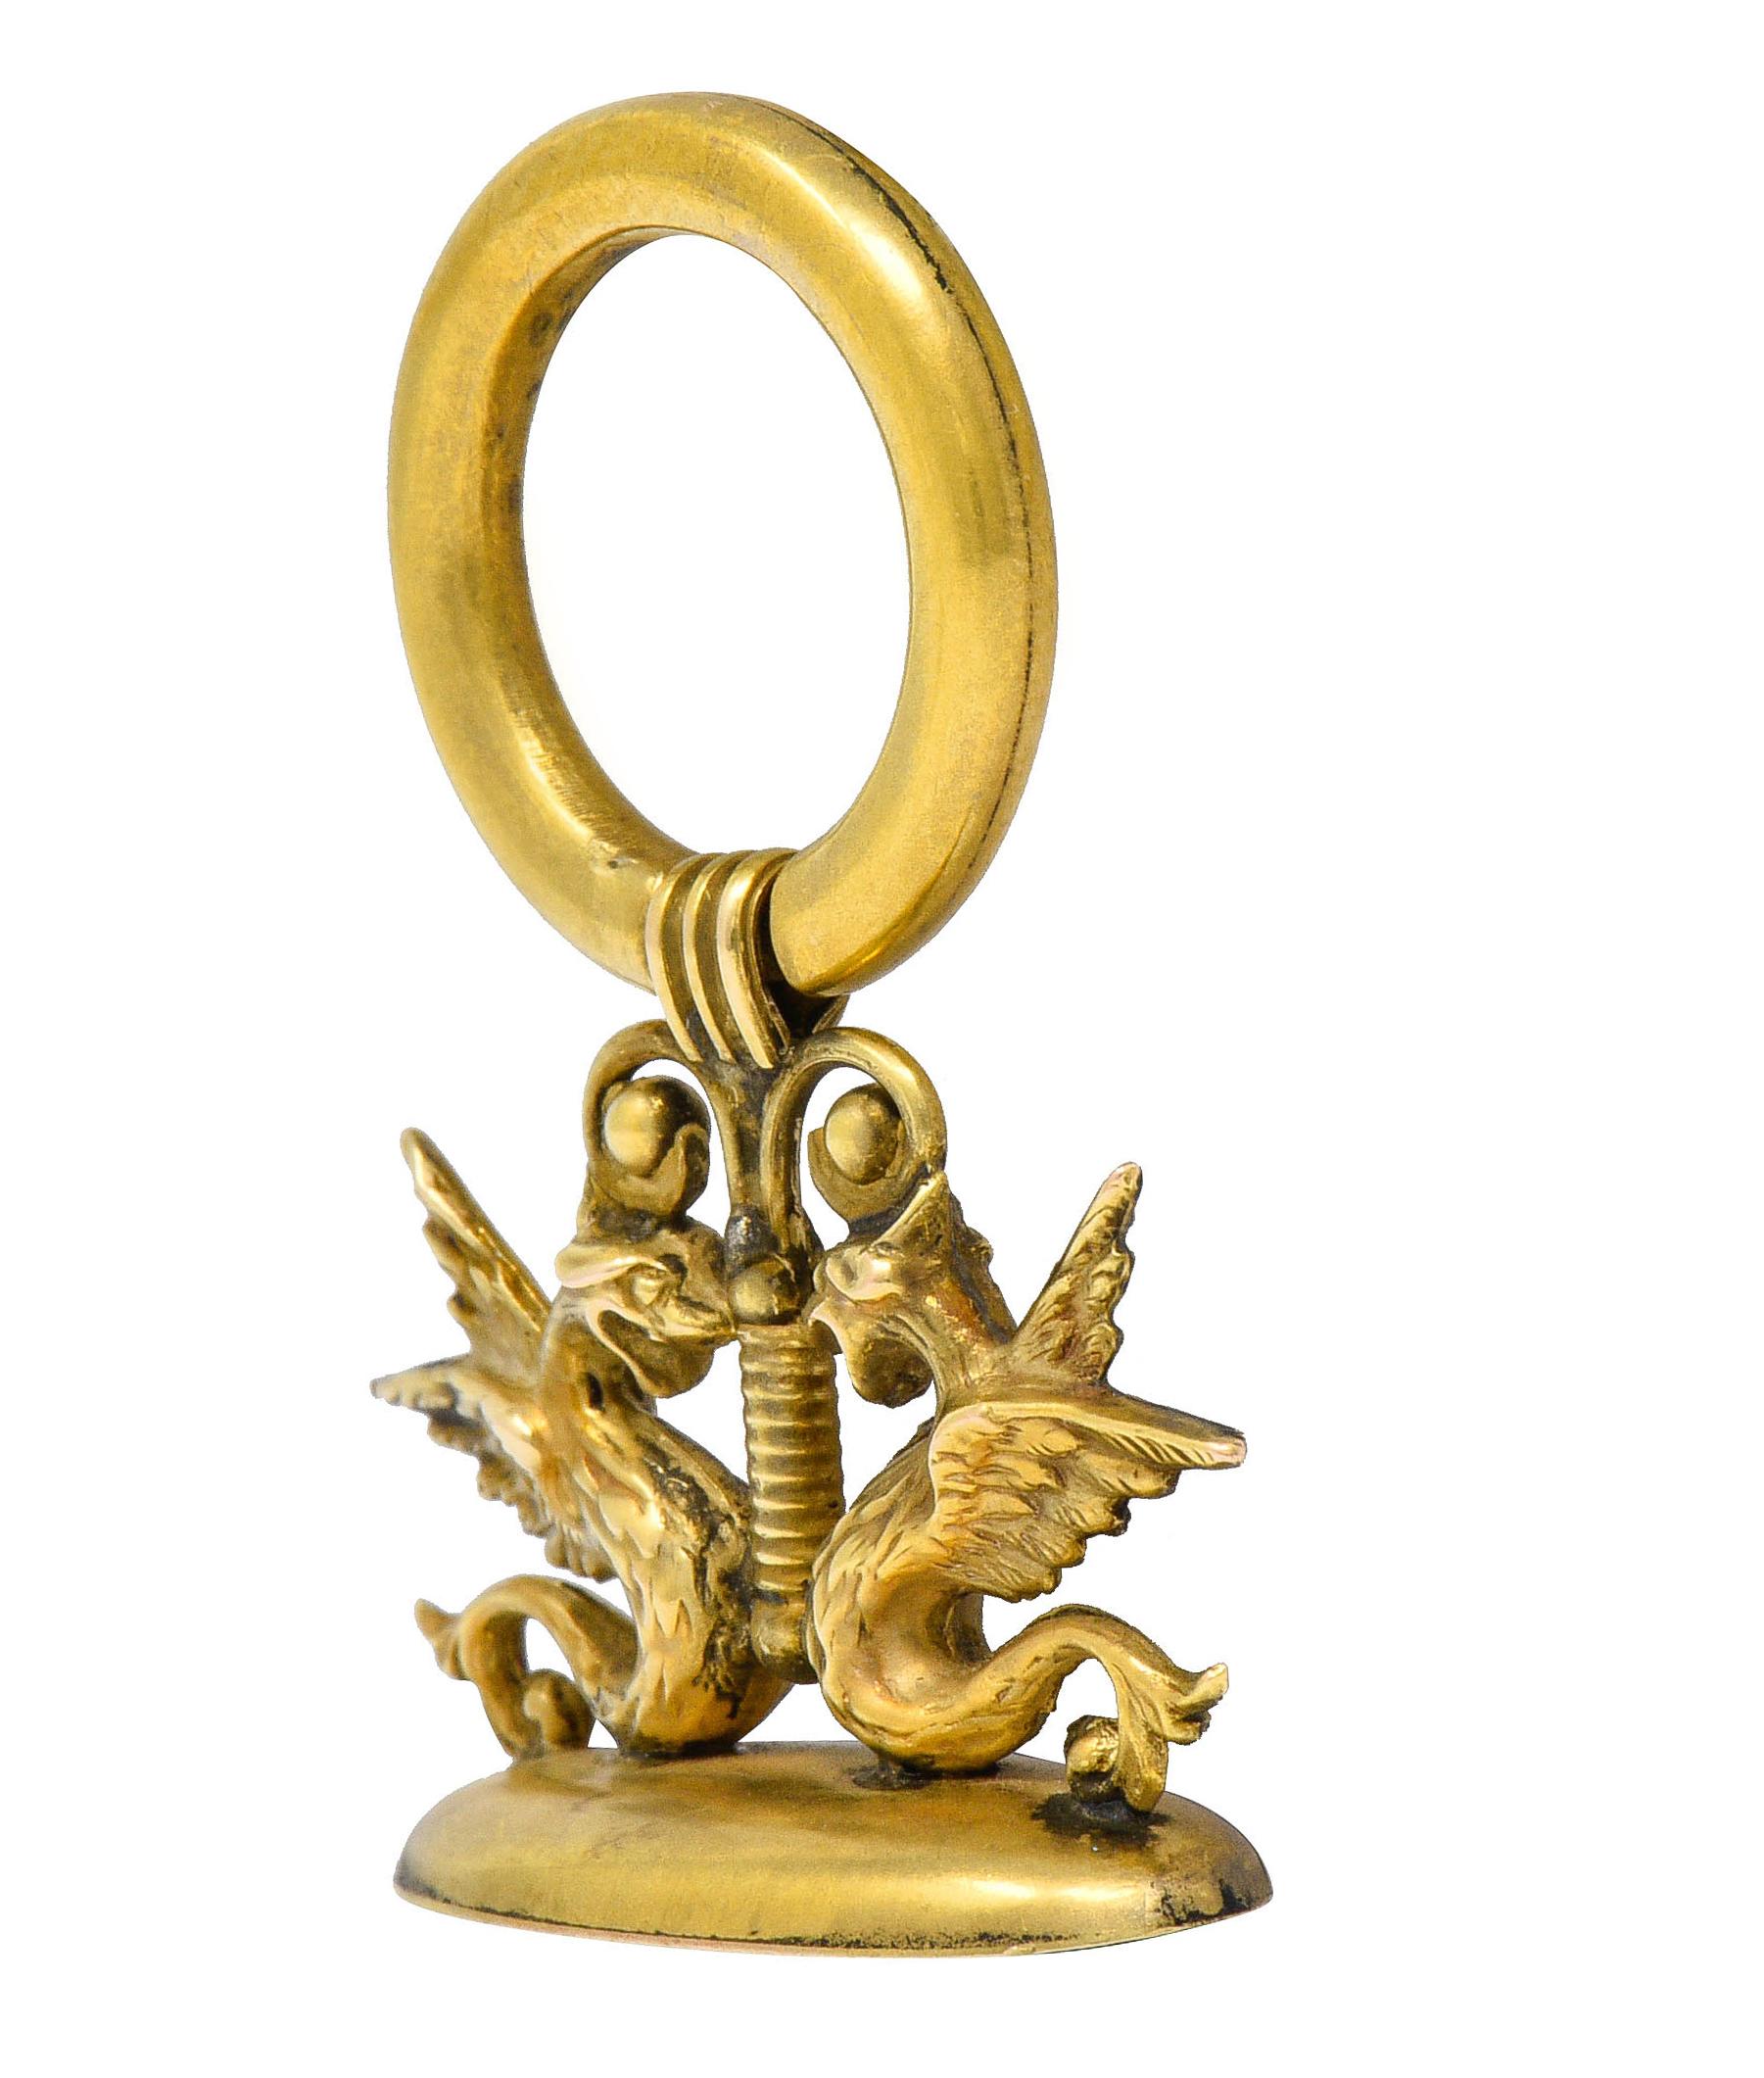 Fob is designed with two mirrored wing serpents

Highly rendered with whiplash tails and S curved bodies

With an oval fob base inscribed with monogramed lettering

Completed by a large doorknocker style bale

Tested as 14 karat gold

Circa: